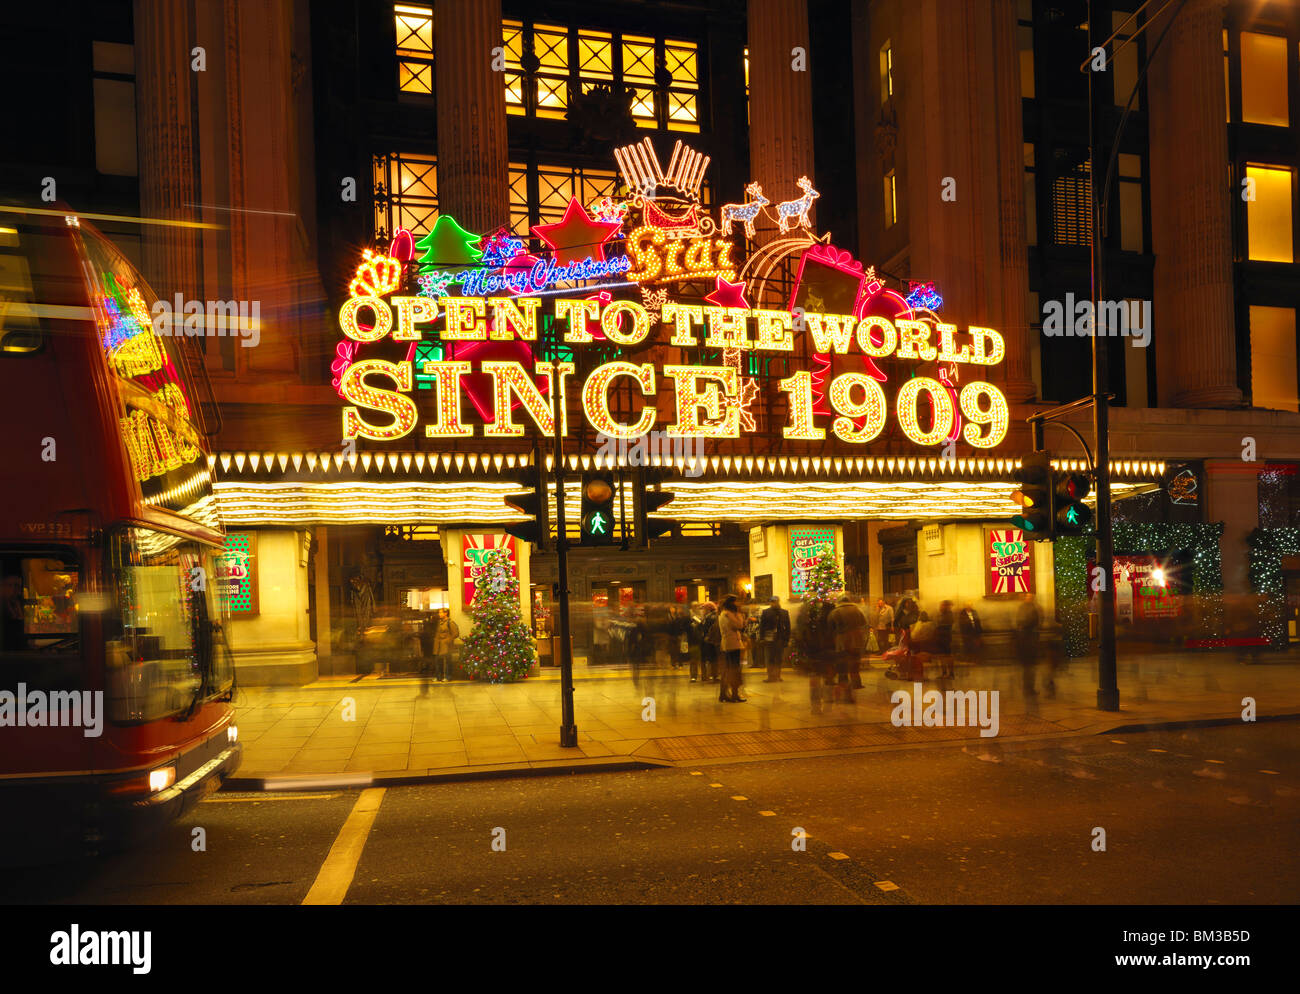 Selfridges Store, Oxford Street Xmas 2009, ( Shot On A Hasselblad H3DII-50, Producing A 140MB+ Tiff File If Required) Stock Photo